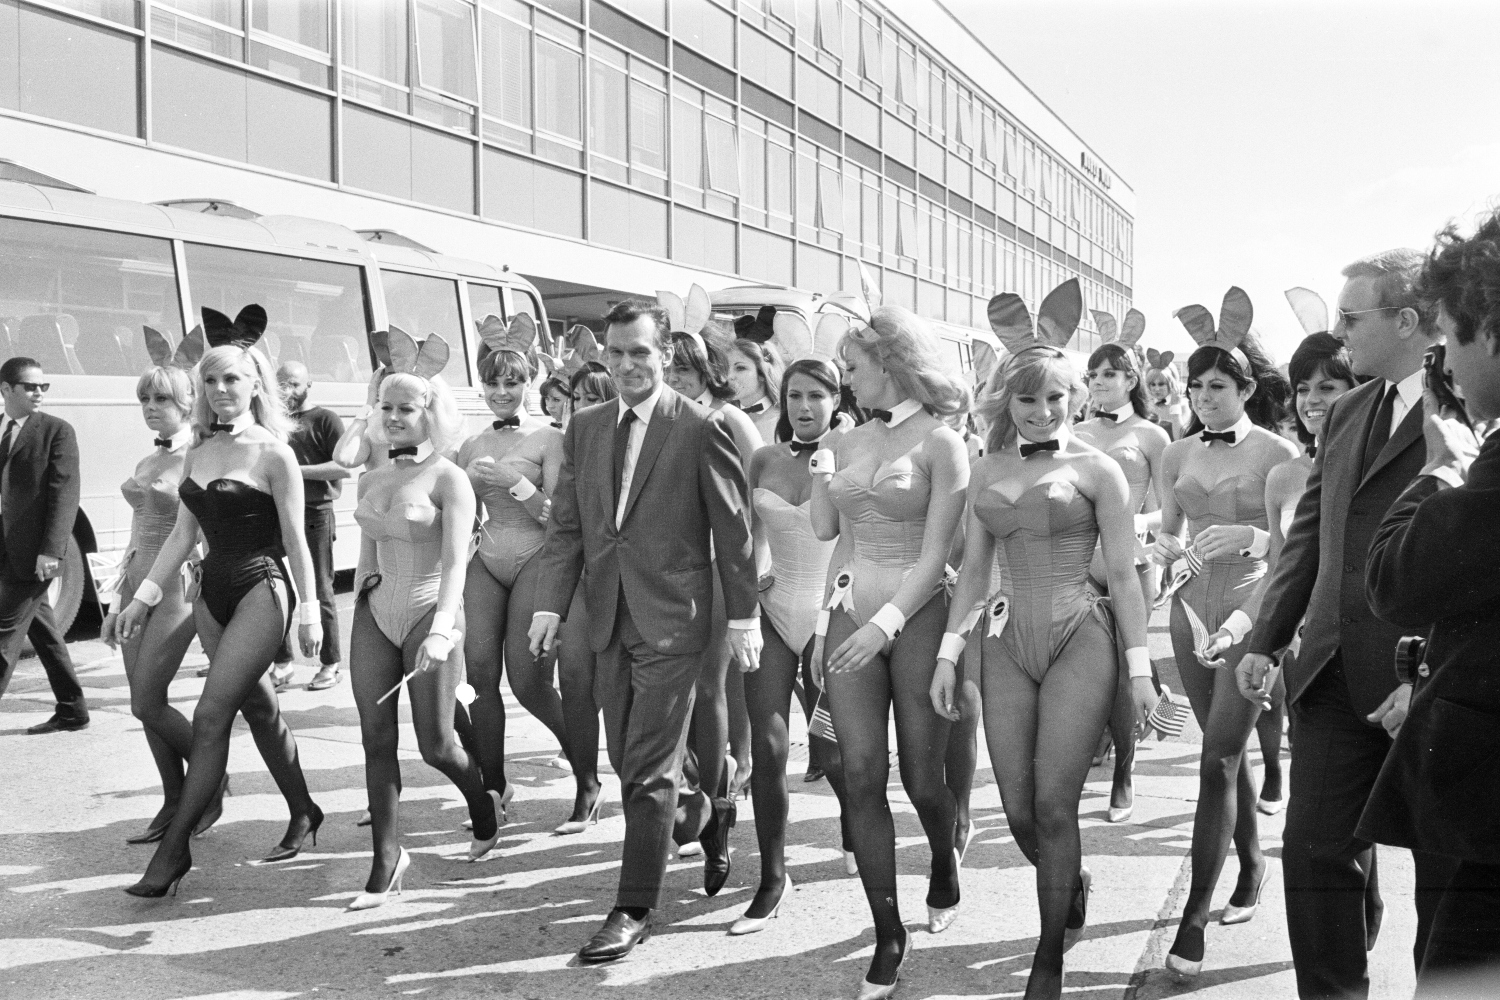 Hugh Hefner Boss of the Playboy Empire arrives with an entourage of Bunny Girls at London Heathrow Airport, Saturday 25th June 1966. Heff, is in Britain to officially open his 16th Playboy Club, located in Park Lane, London.